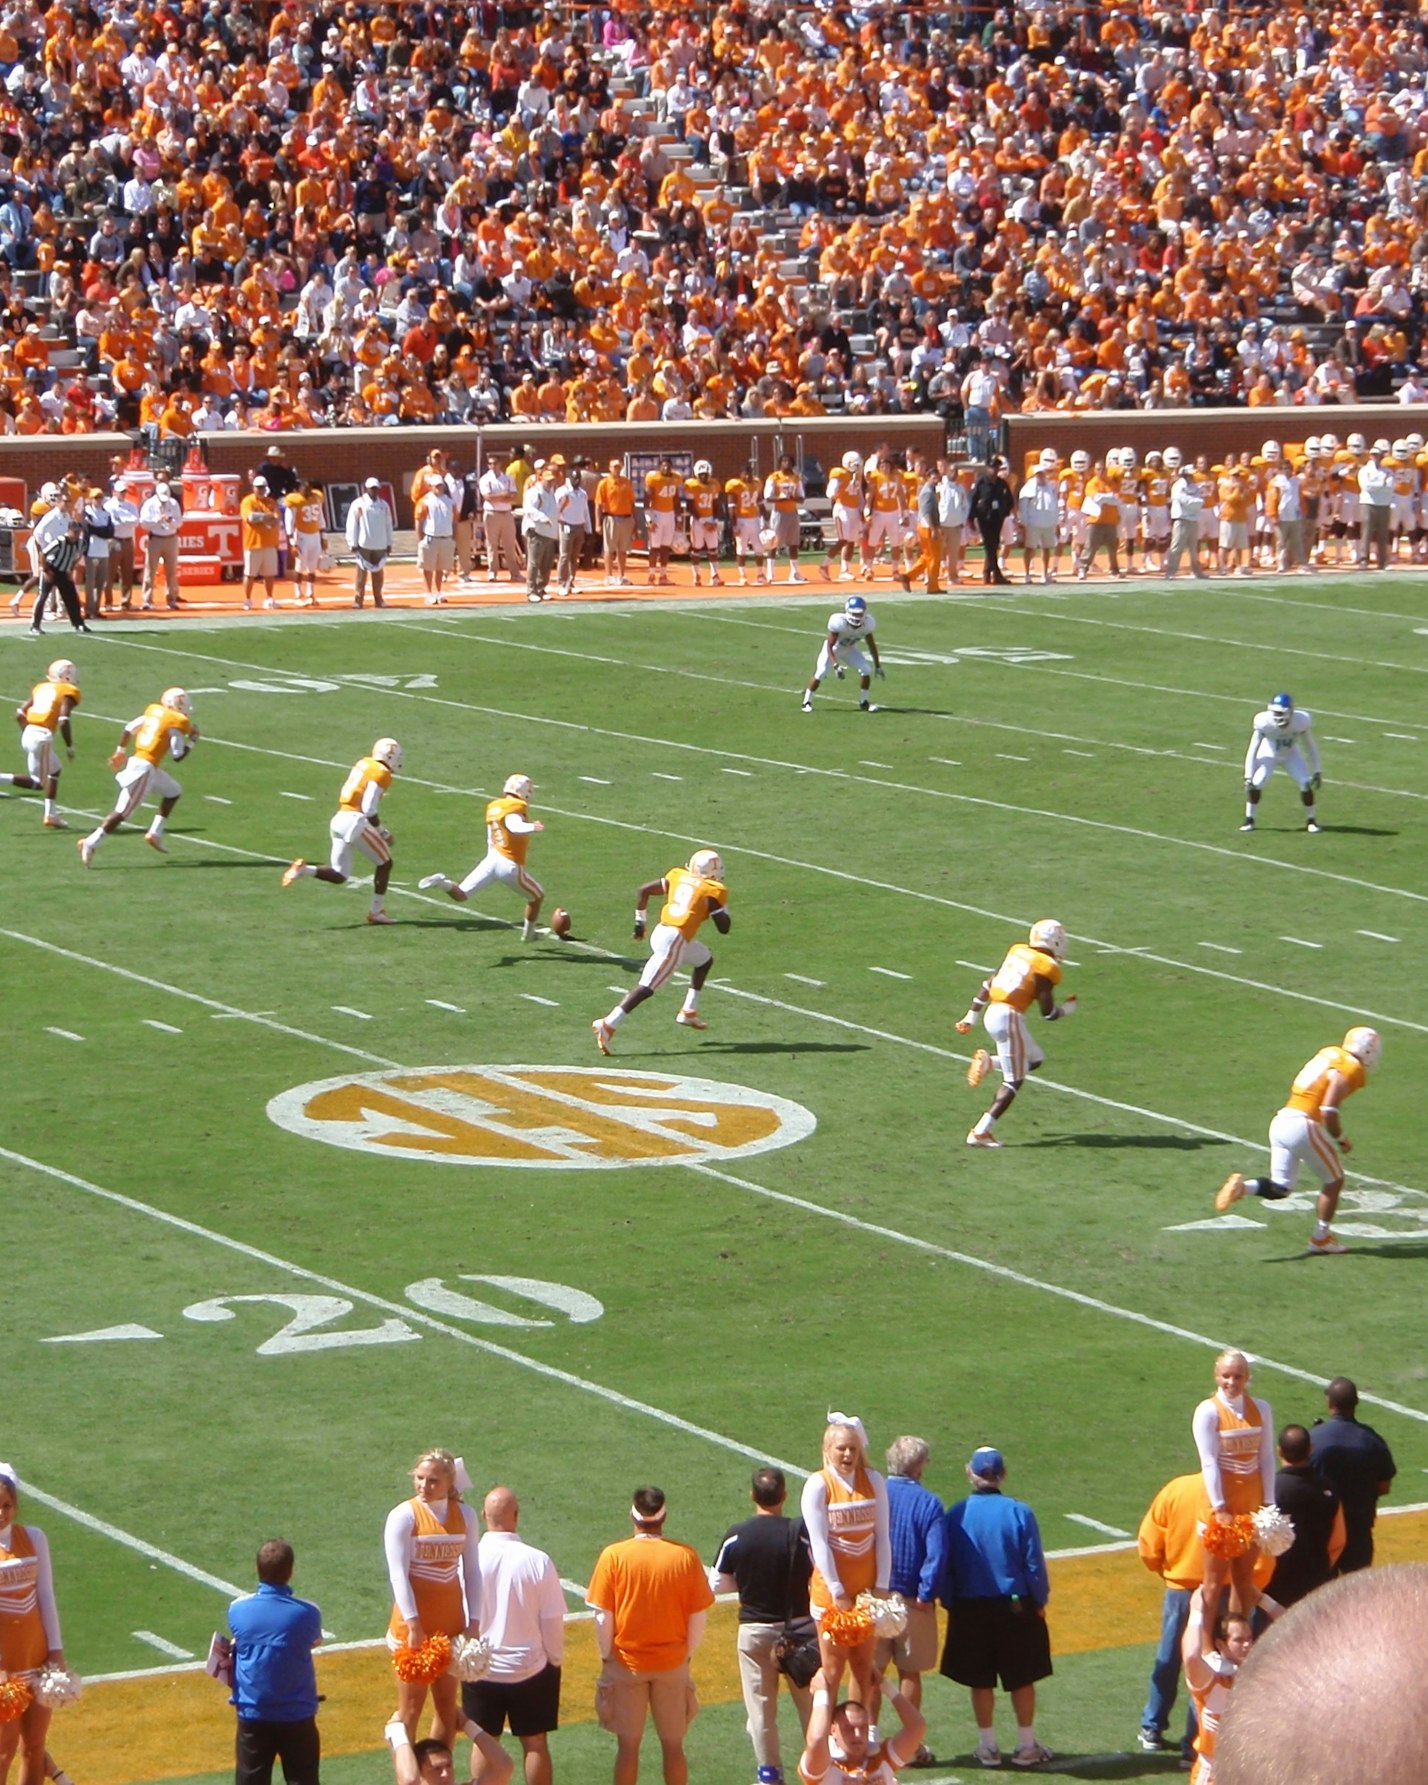 Football at University of Tennessee, Knoxville